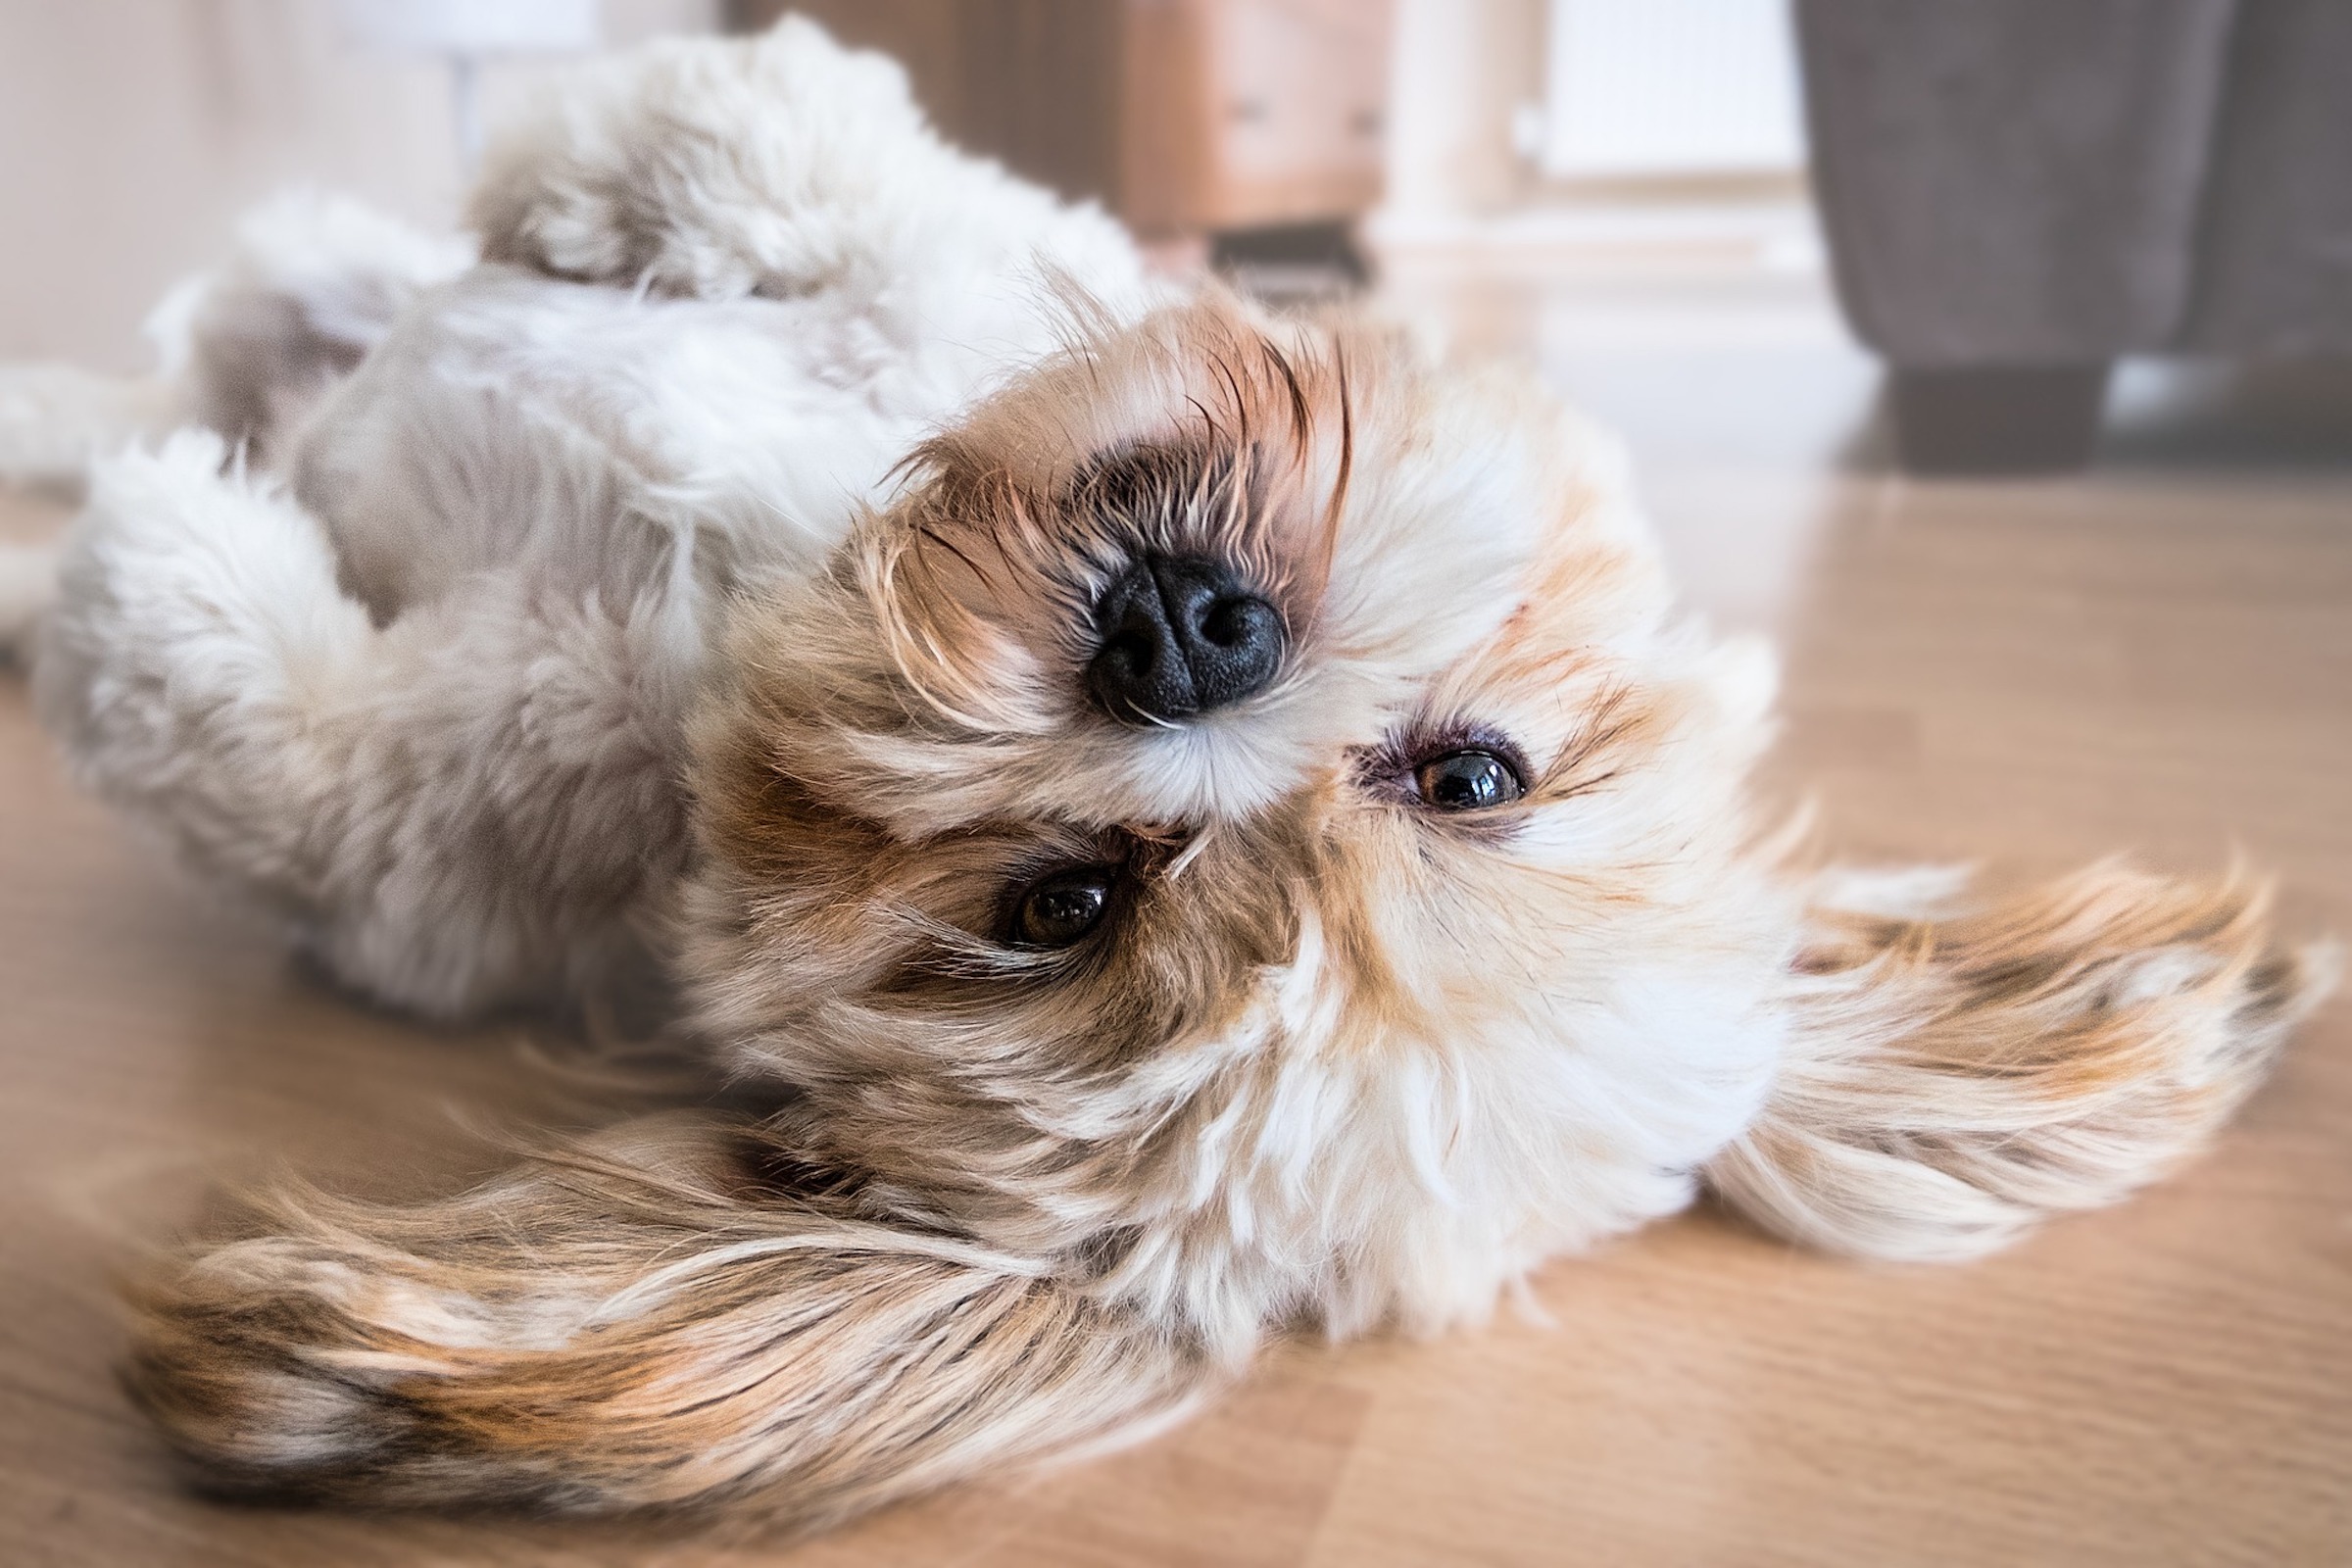 Should Your Lhasa Apso Have Long Hair Or A Puppy Cut? | PawTracks